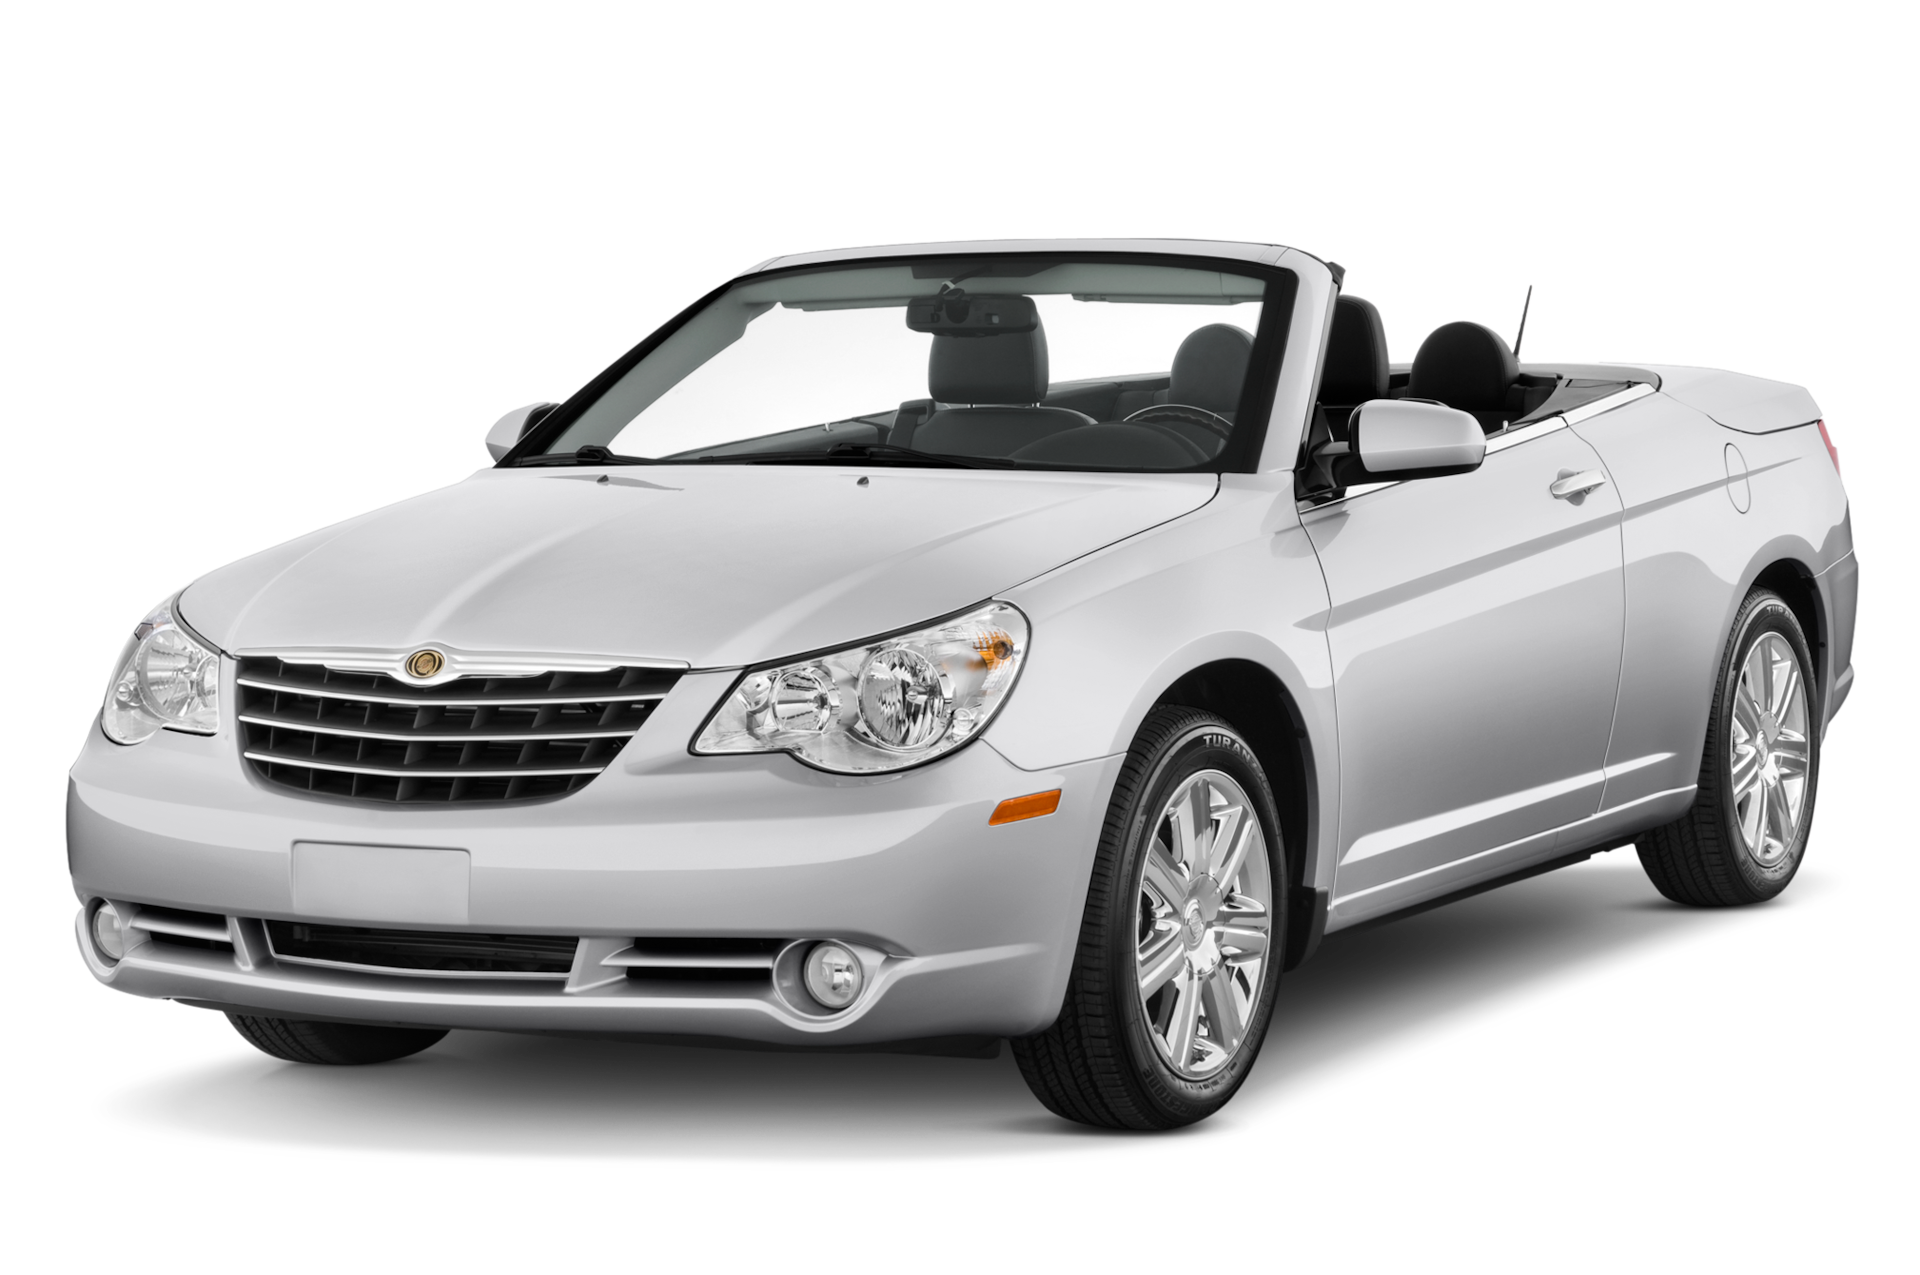 2010 Chrysler Sebring Prices, Reviews, and Photos - MotorTrend